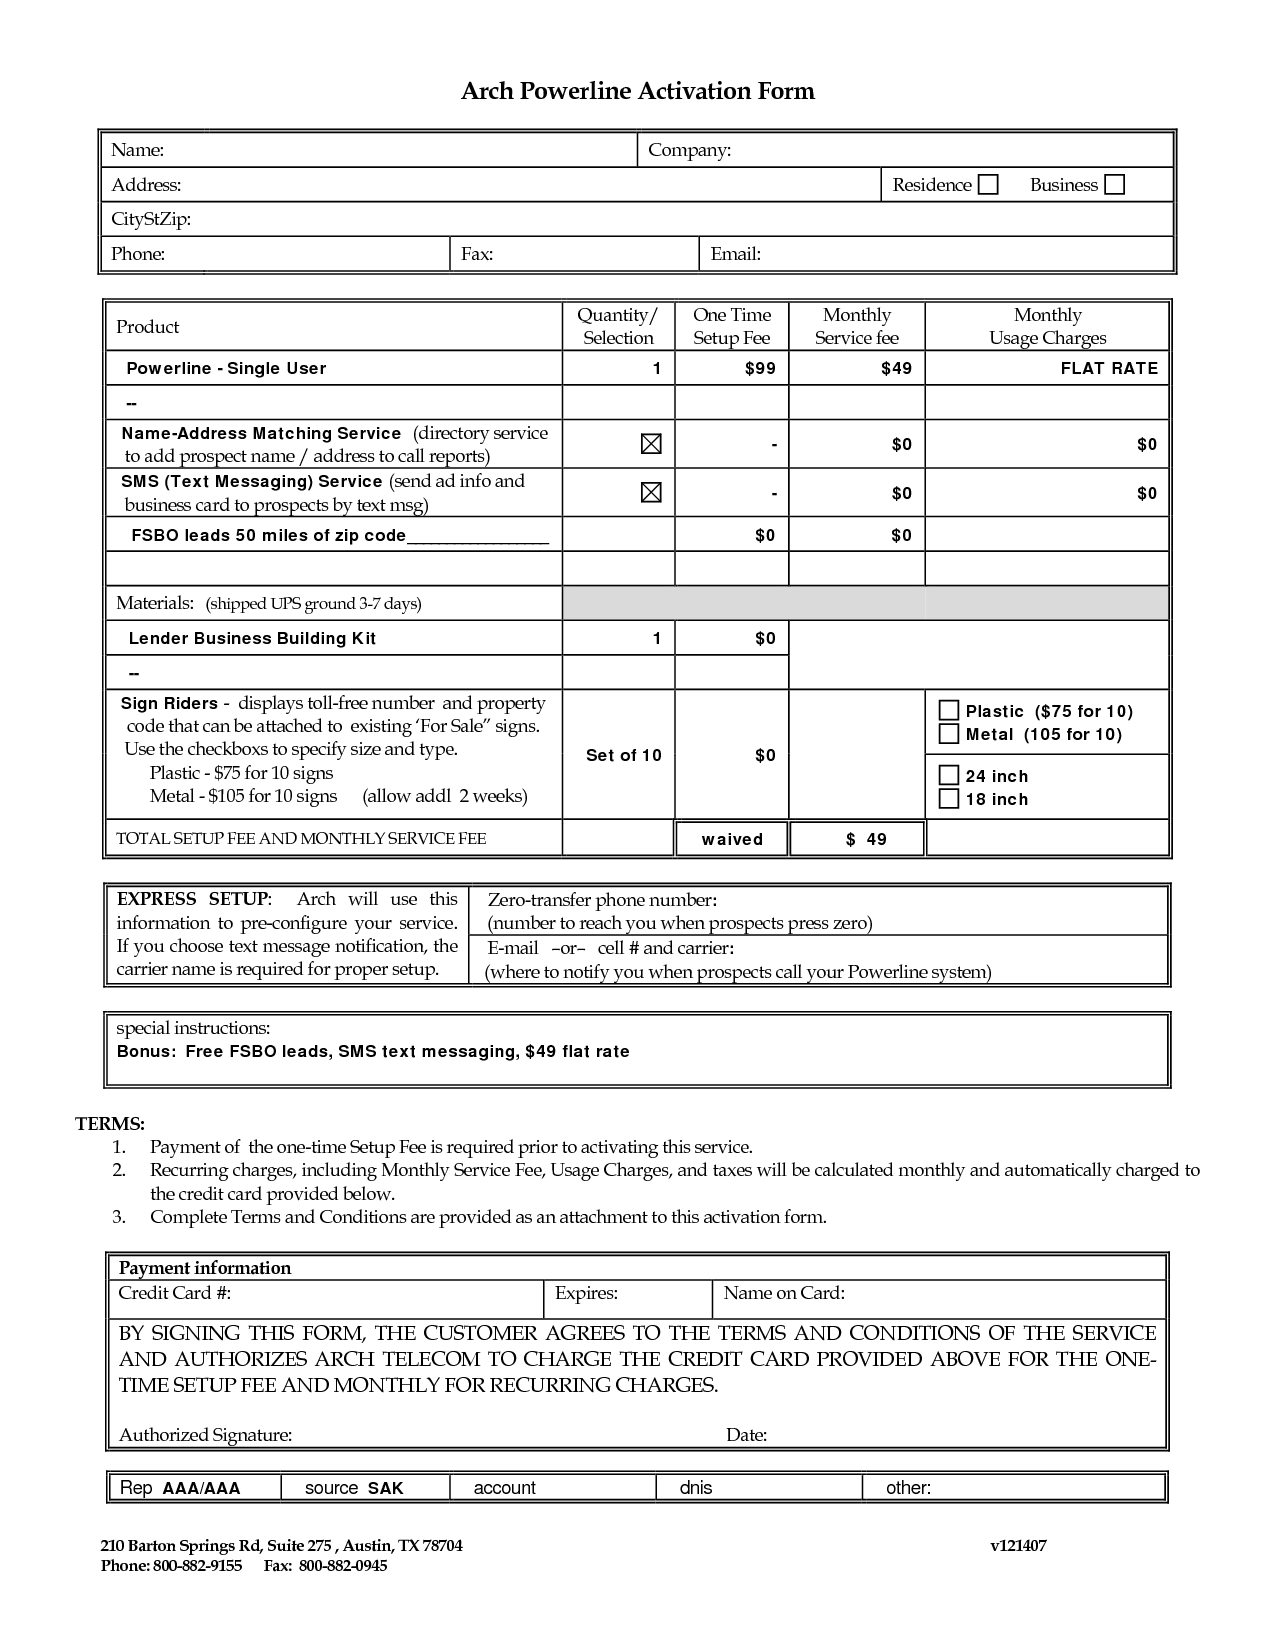 020 Sales Call Reporting Template Weekly Report 21554 Pertaining To Sales Rep Call Report Template